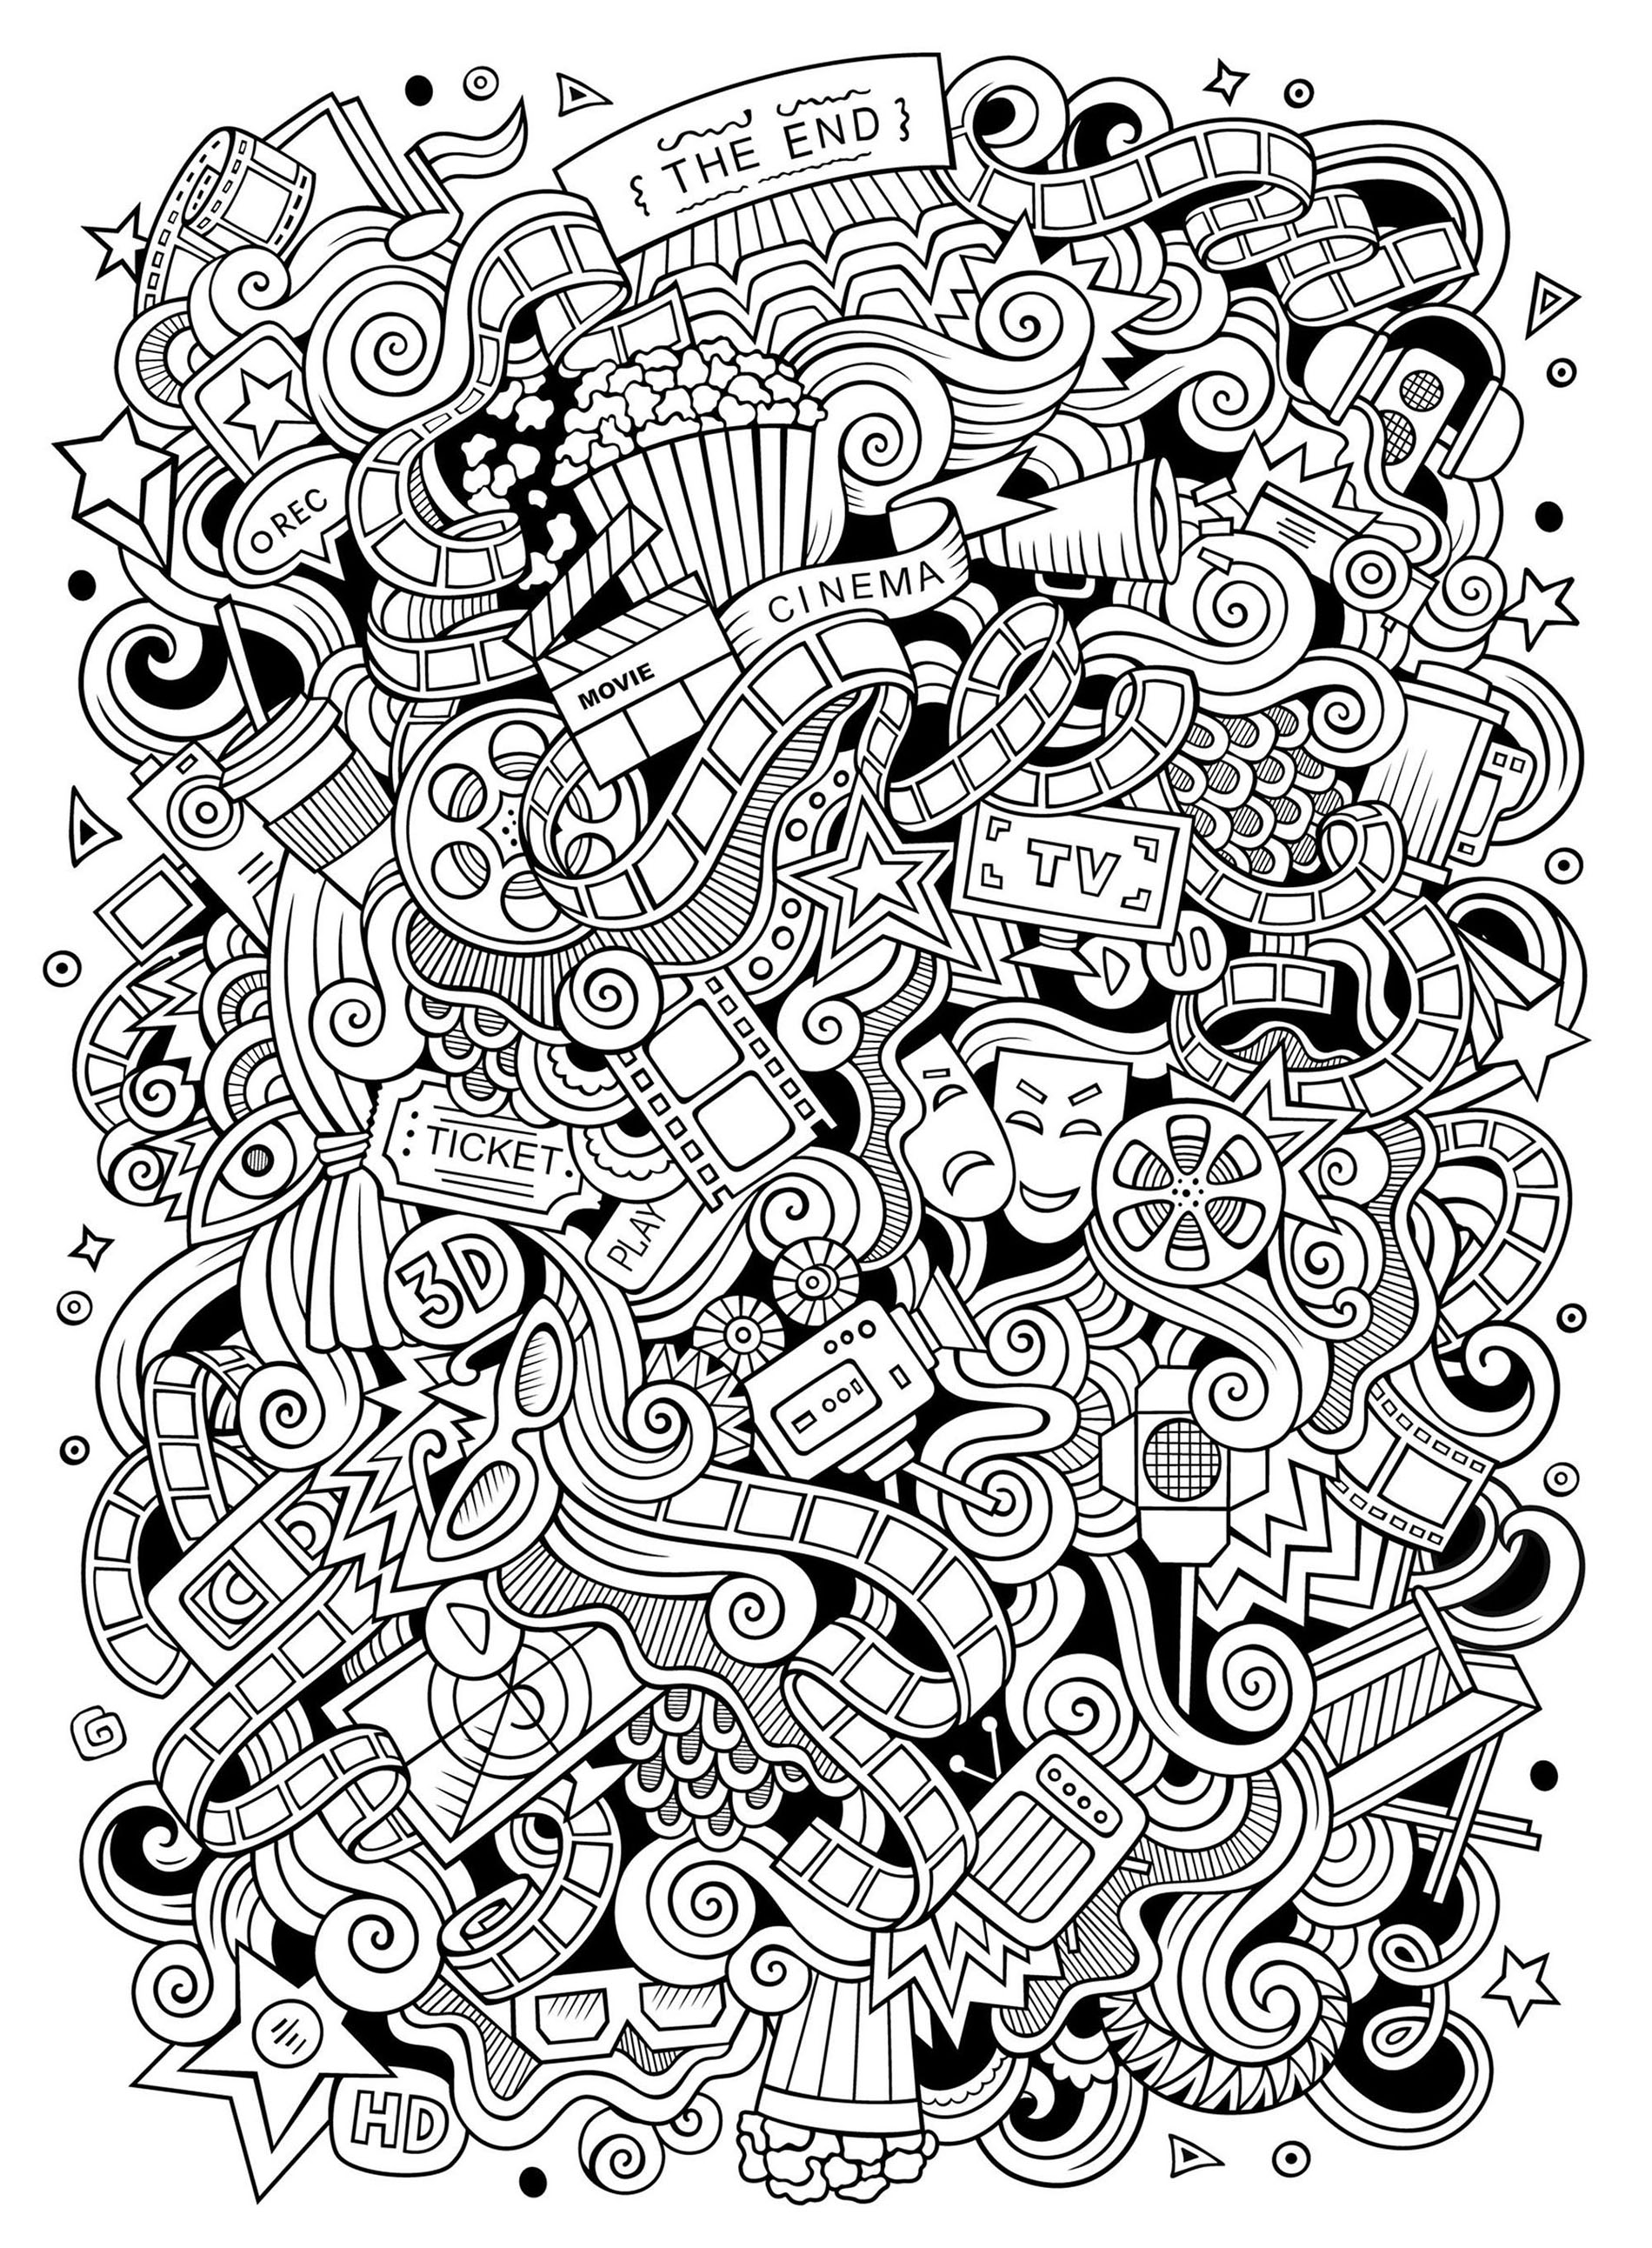 easy-doodle-on-the-theme-of-cinema-doodle-art-kids-coloring-pages